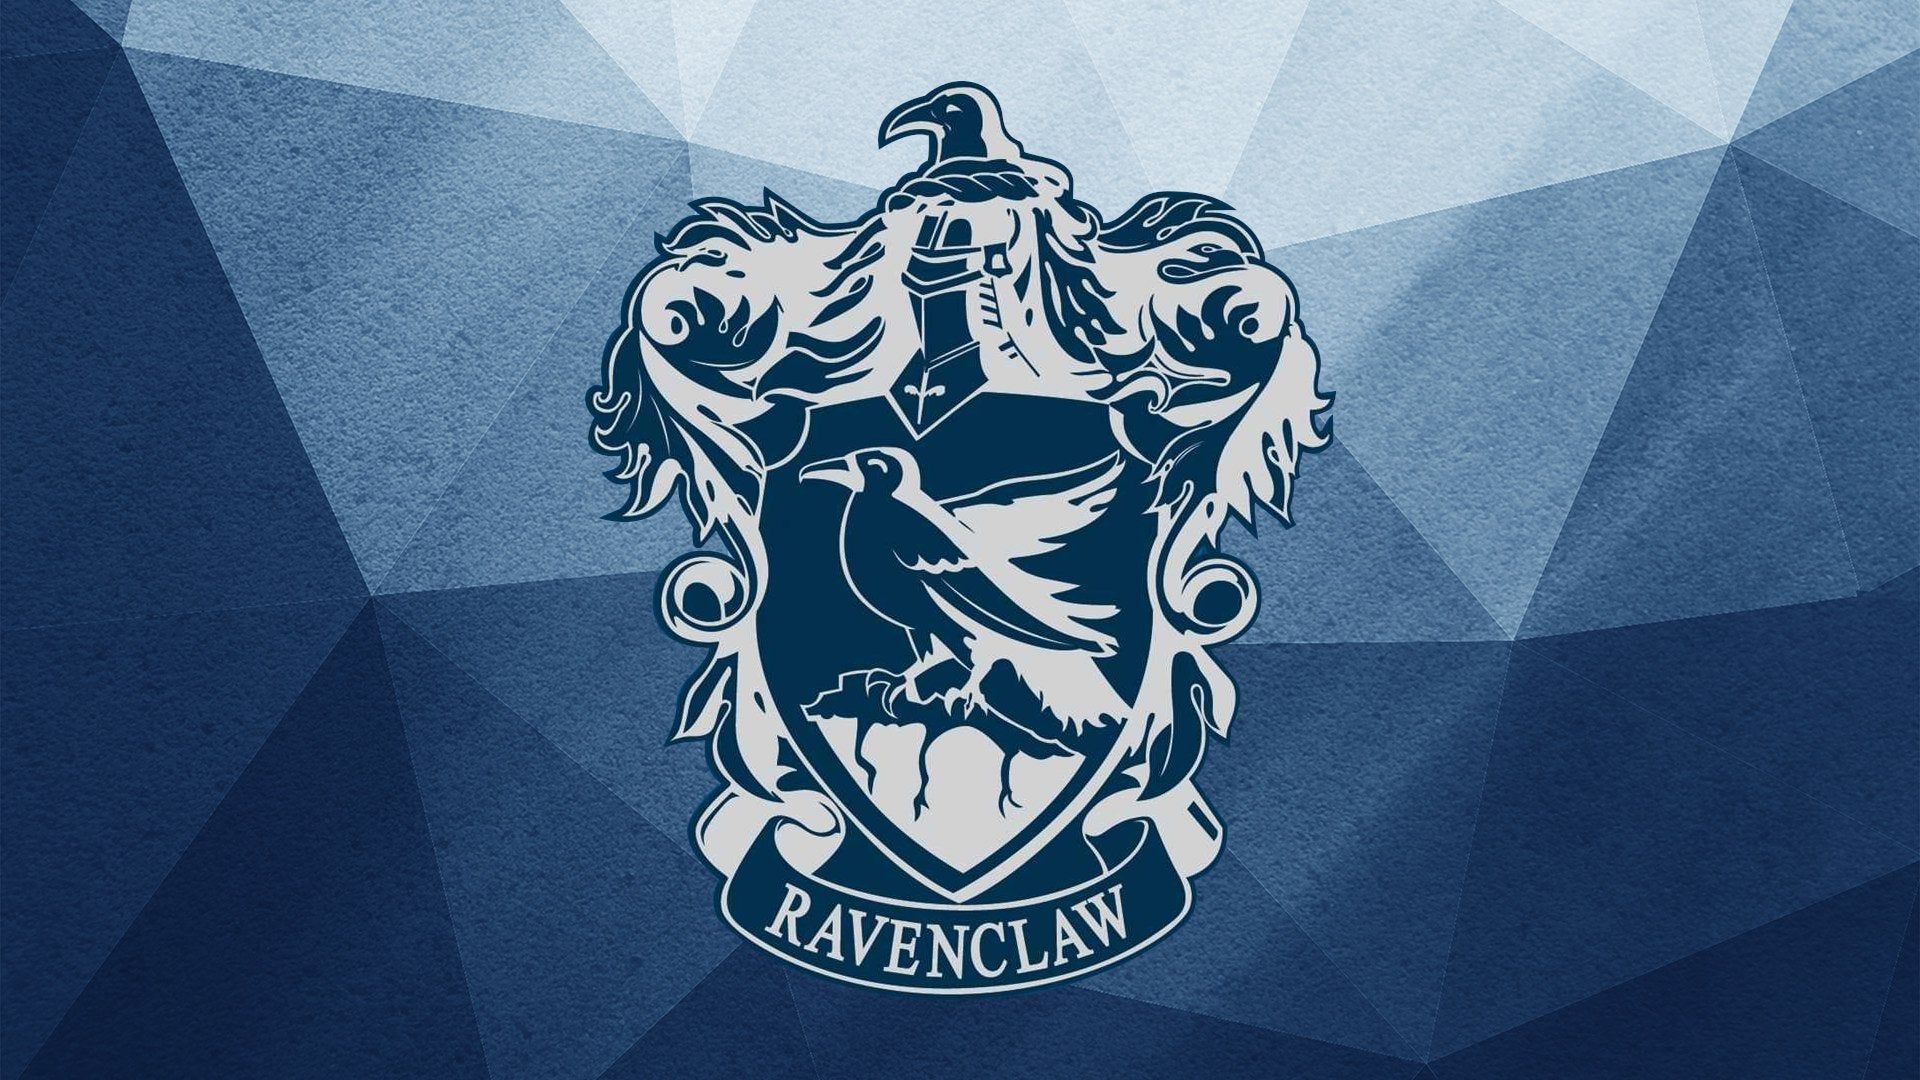 Couldn't find a ravenclaw wallpaper i liked so i threw one. Harry potter wallpaper, Harry potter ravenclaw outfits, Harry potter ravenclaw